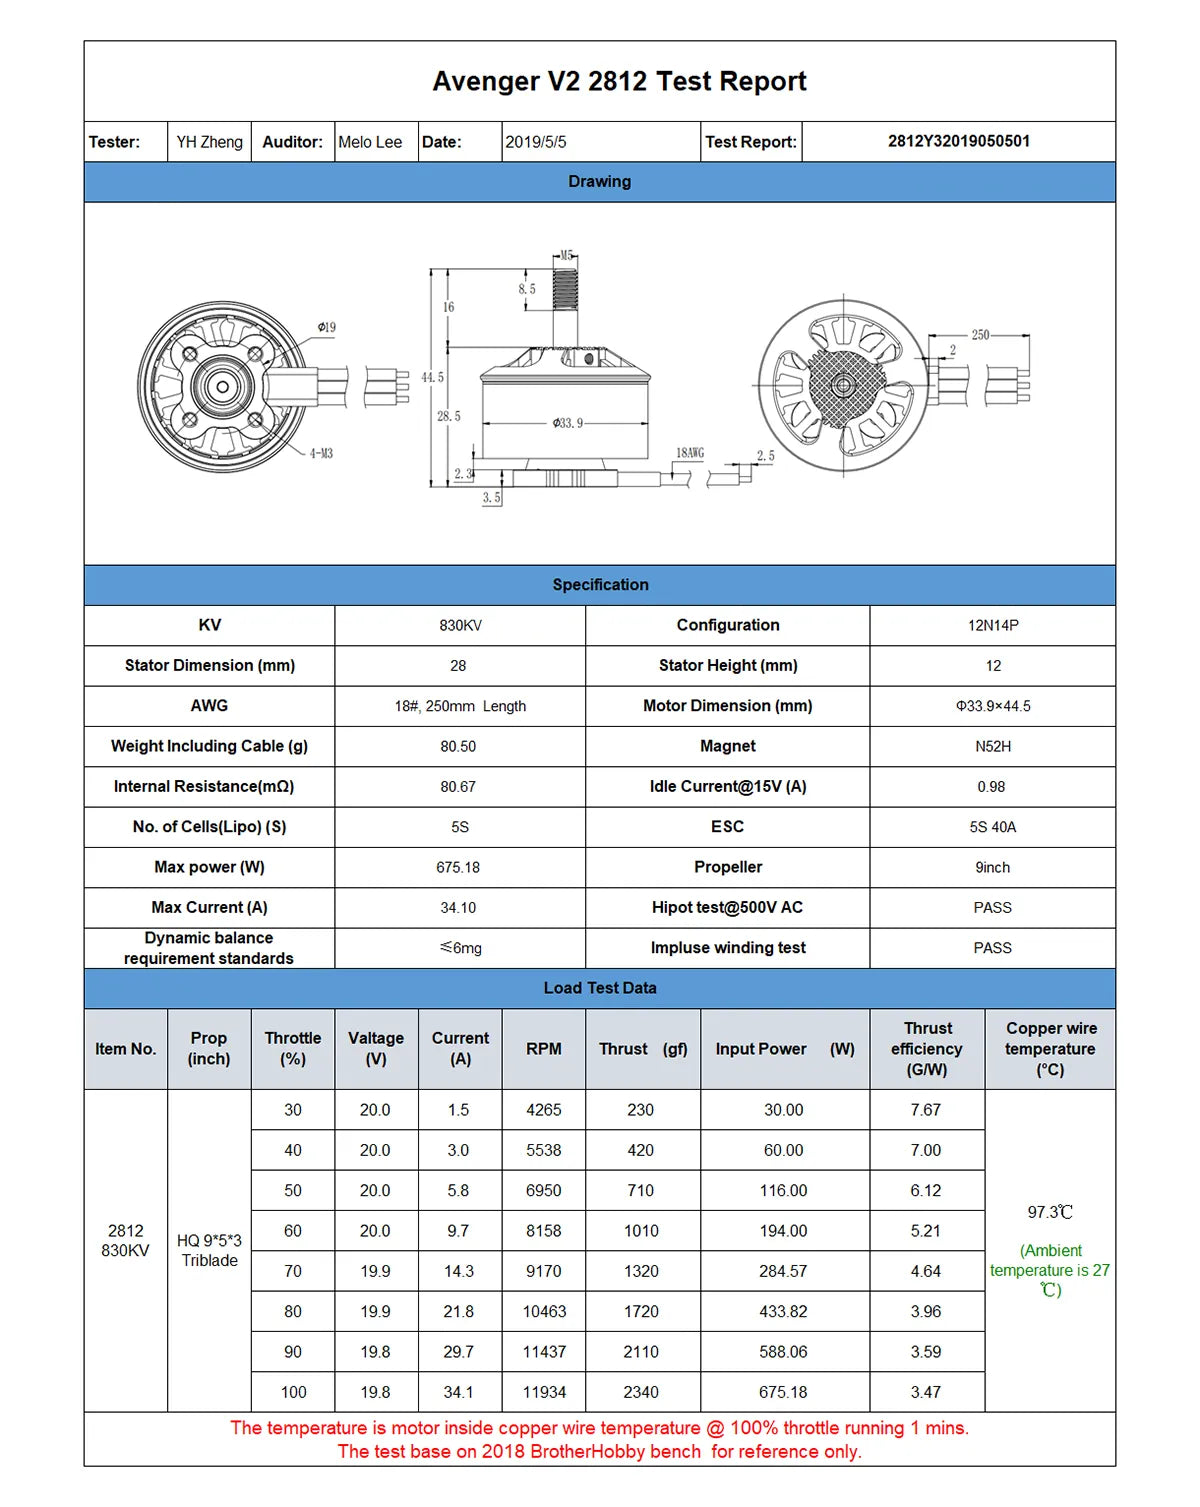 YH Zheng Auditor: Melo Lee Date: 2019/5/5 Test Report